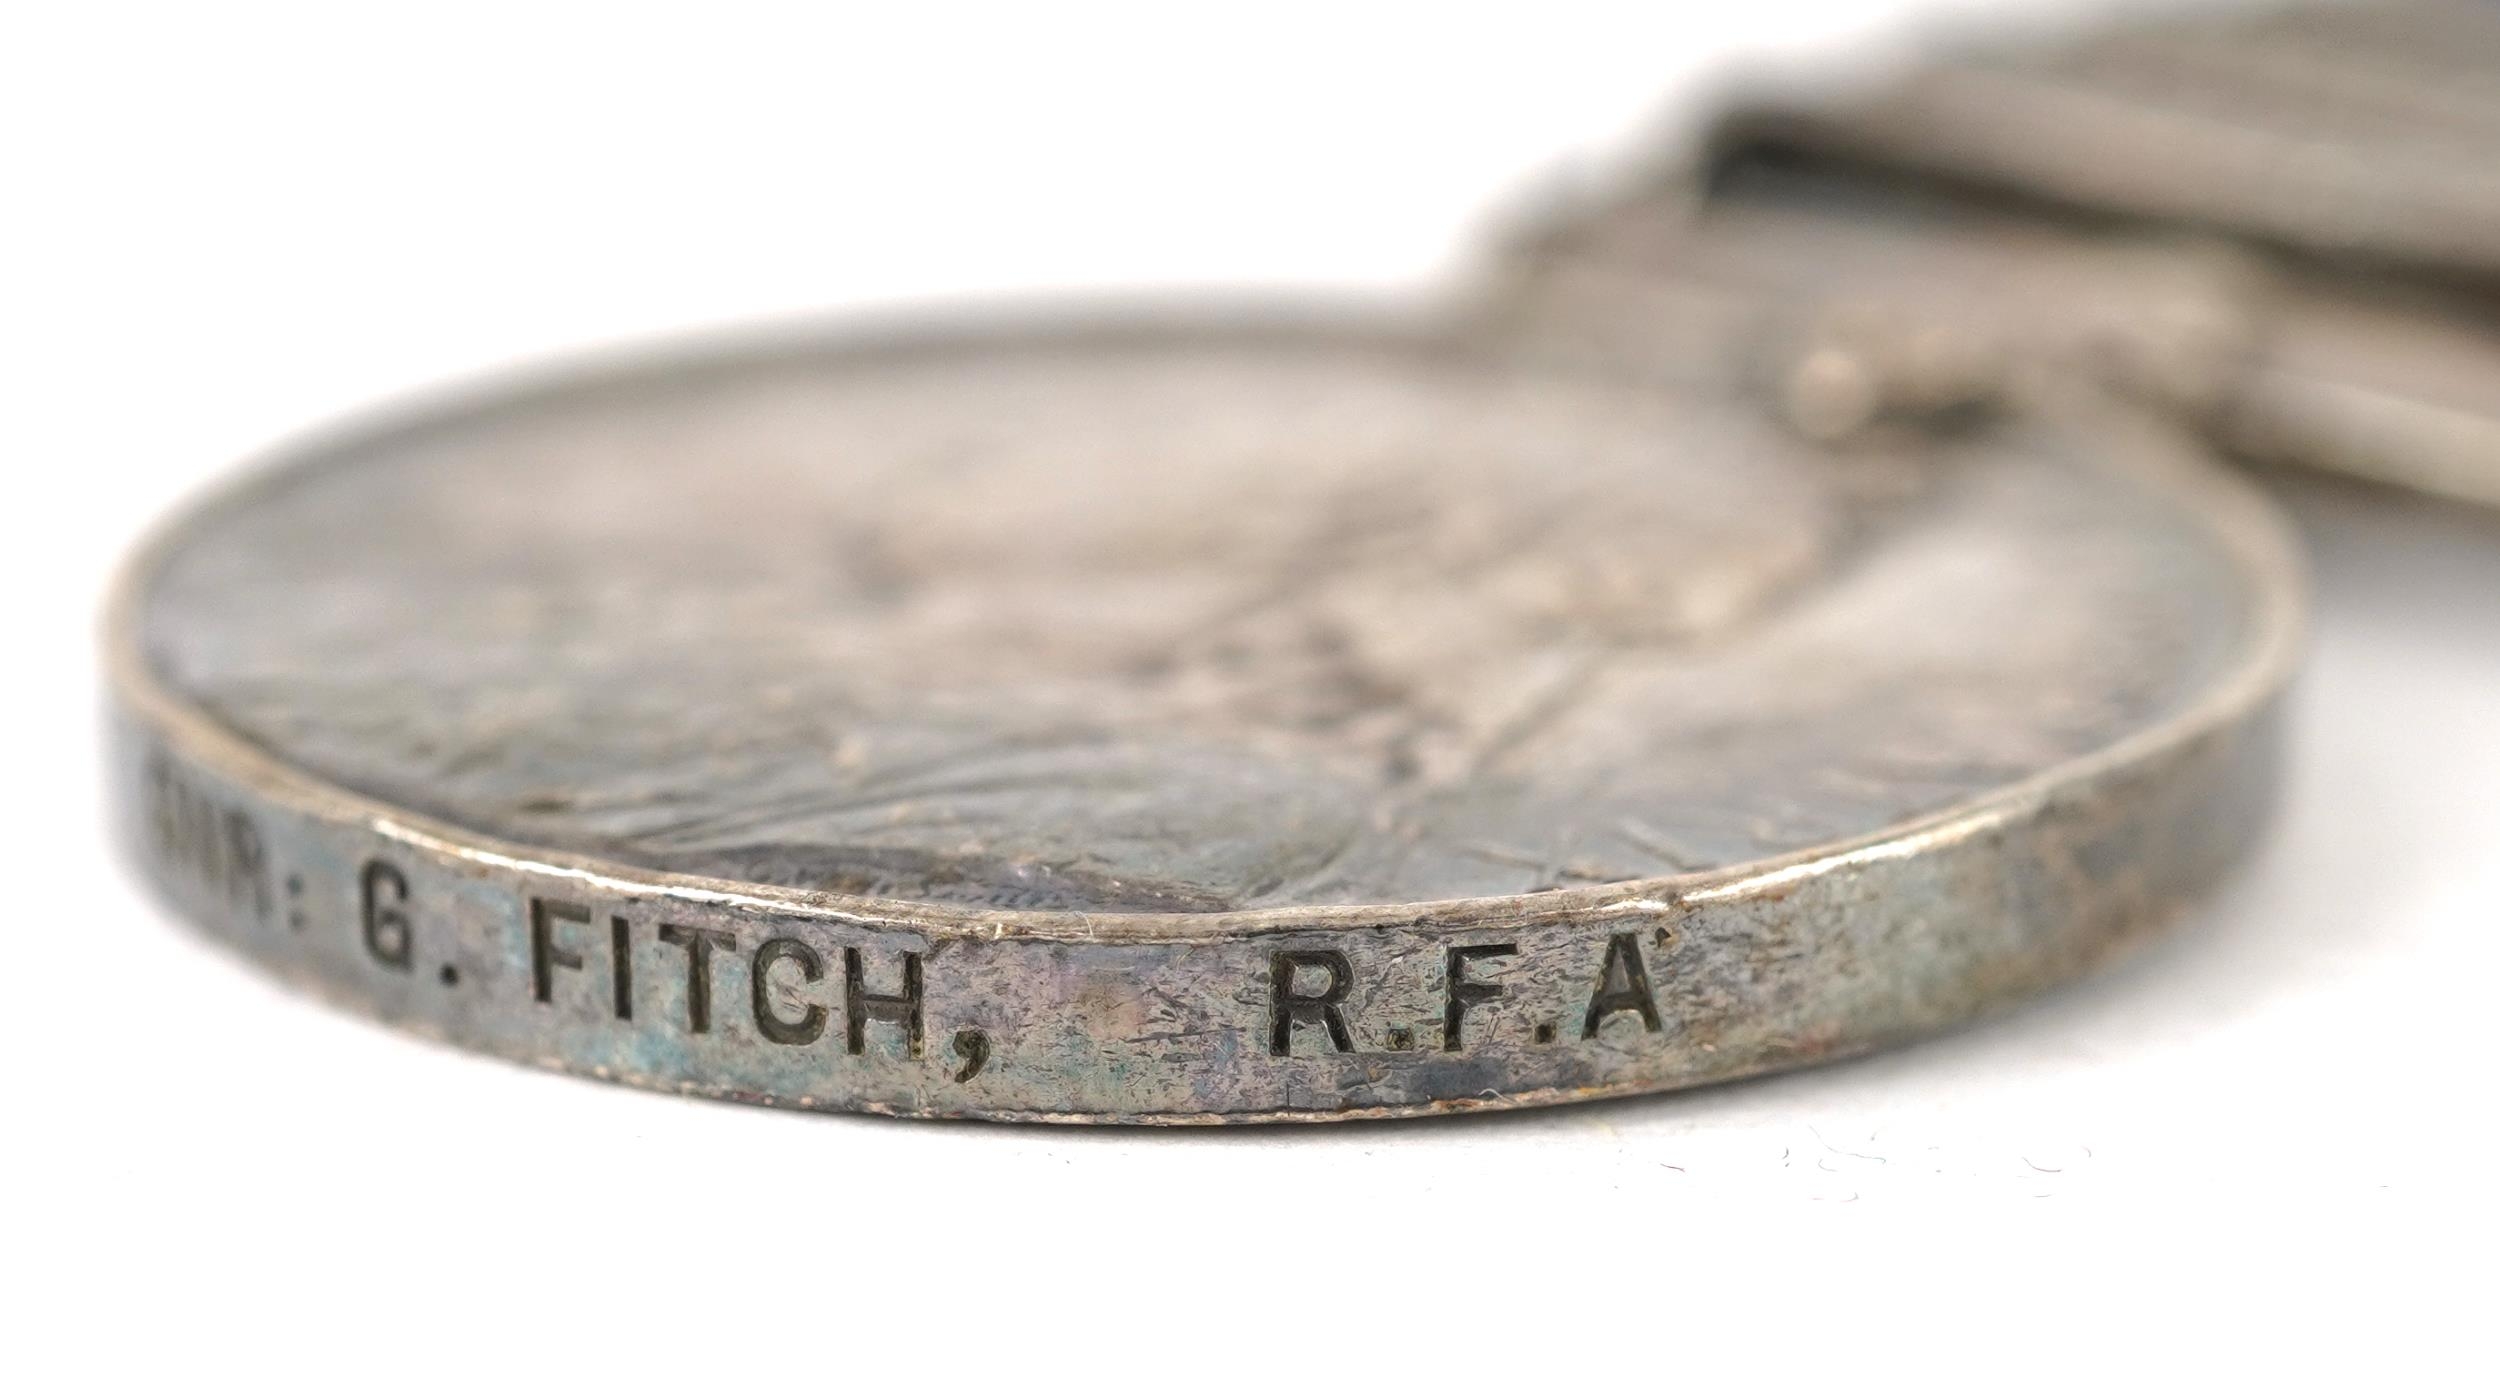 Victorian British military South Africa medal awarded to GNR.G.FITCH.R.F.A with Transvaal Relief - Image 5 of 5